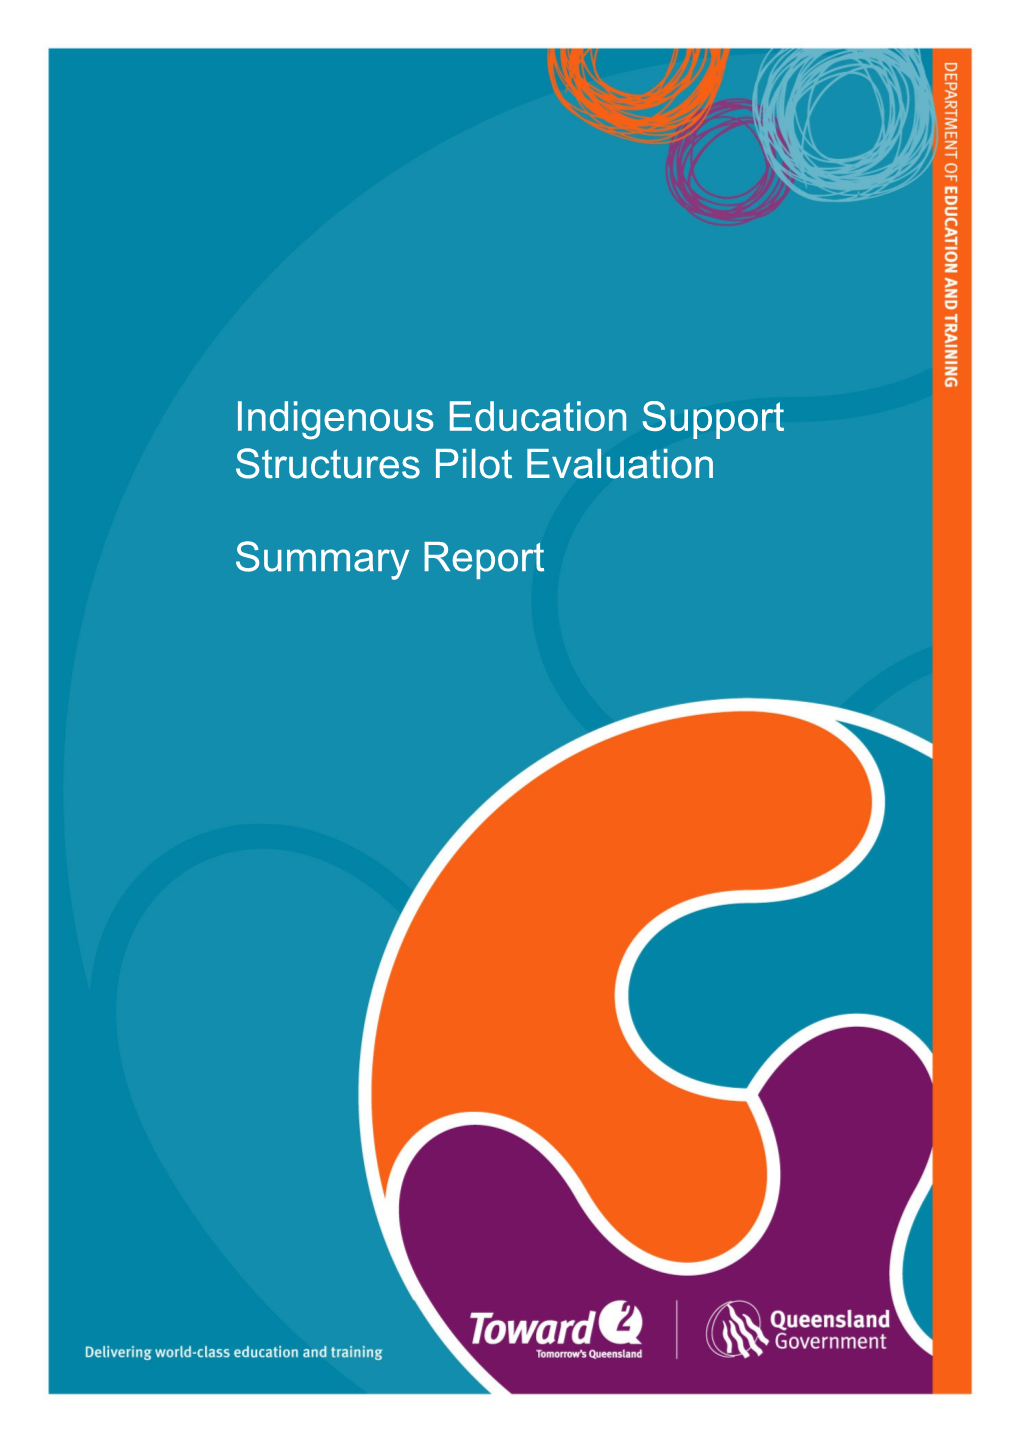 Indigenous Education Support Structures Pilot Evaluation - Summary Report